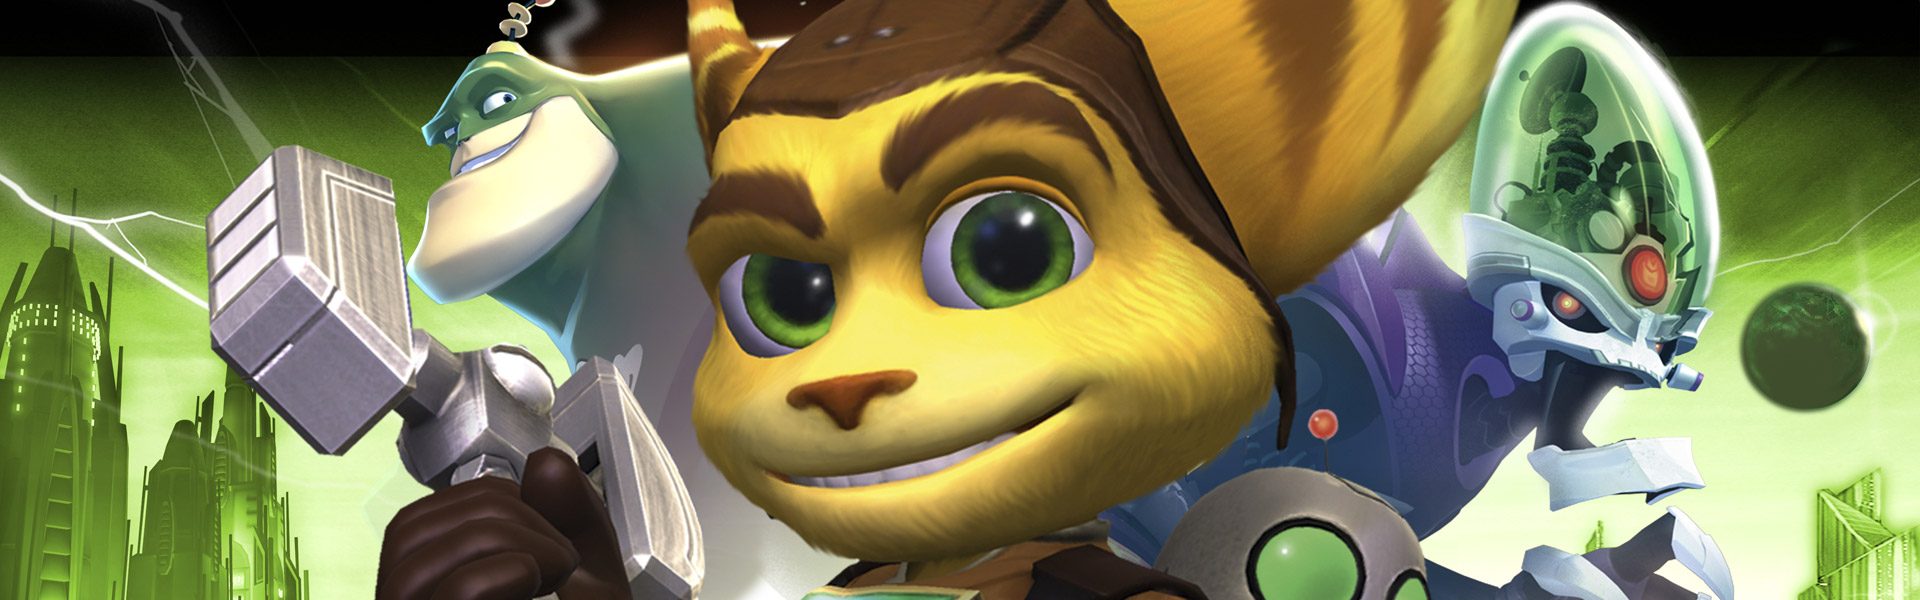 ratchet and clank original trilogy ps4